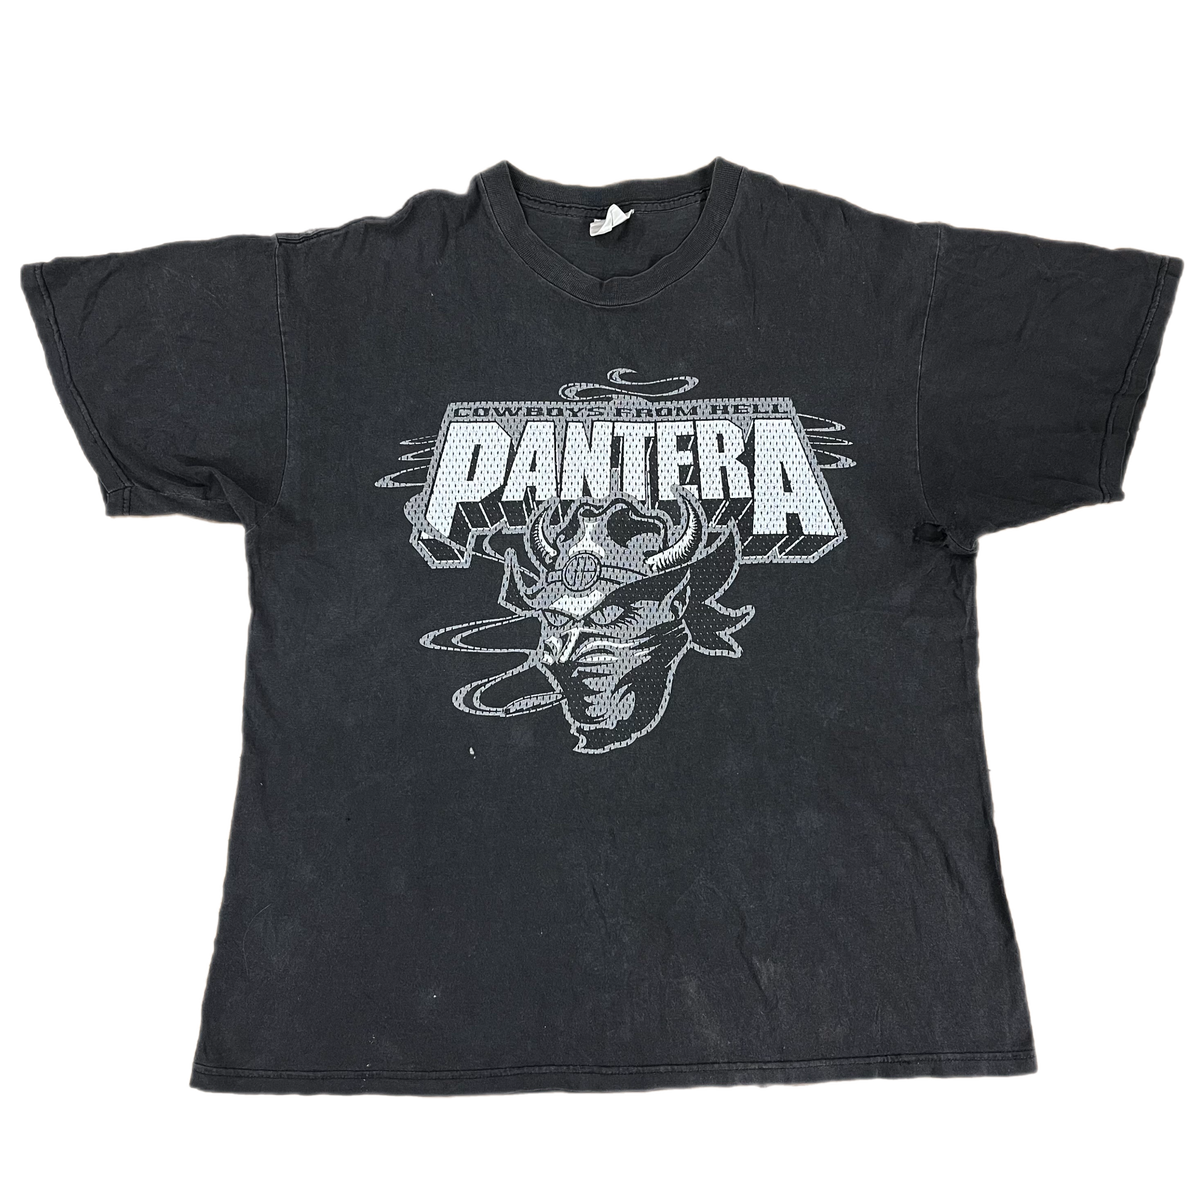 Vintage Pantera &quot;Cowboys From Hell&quot; T-Shirt